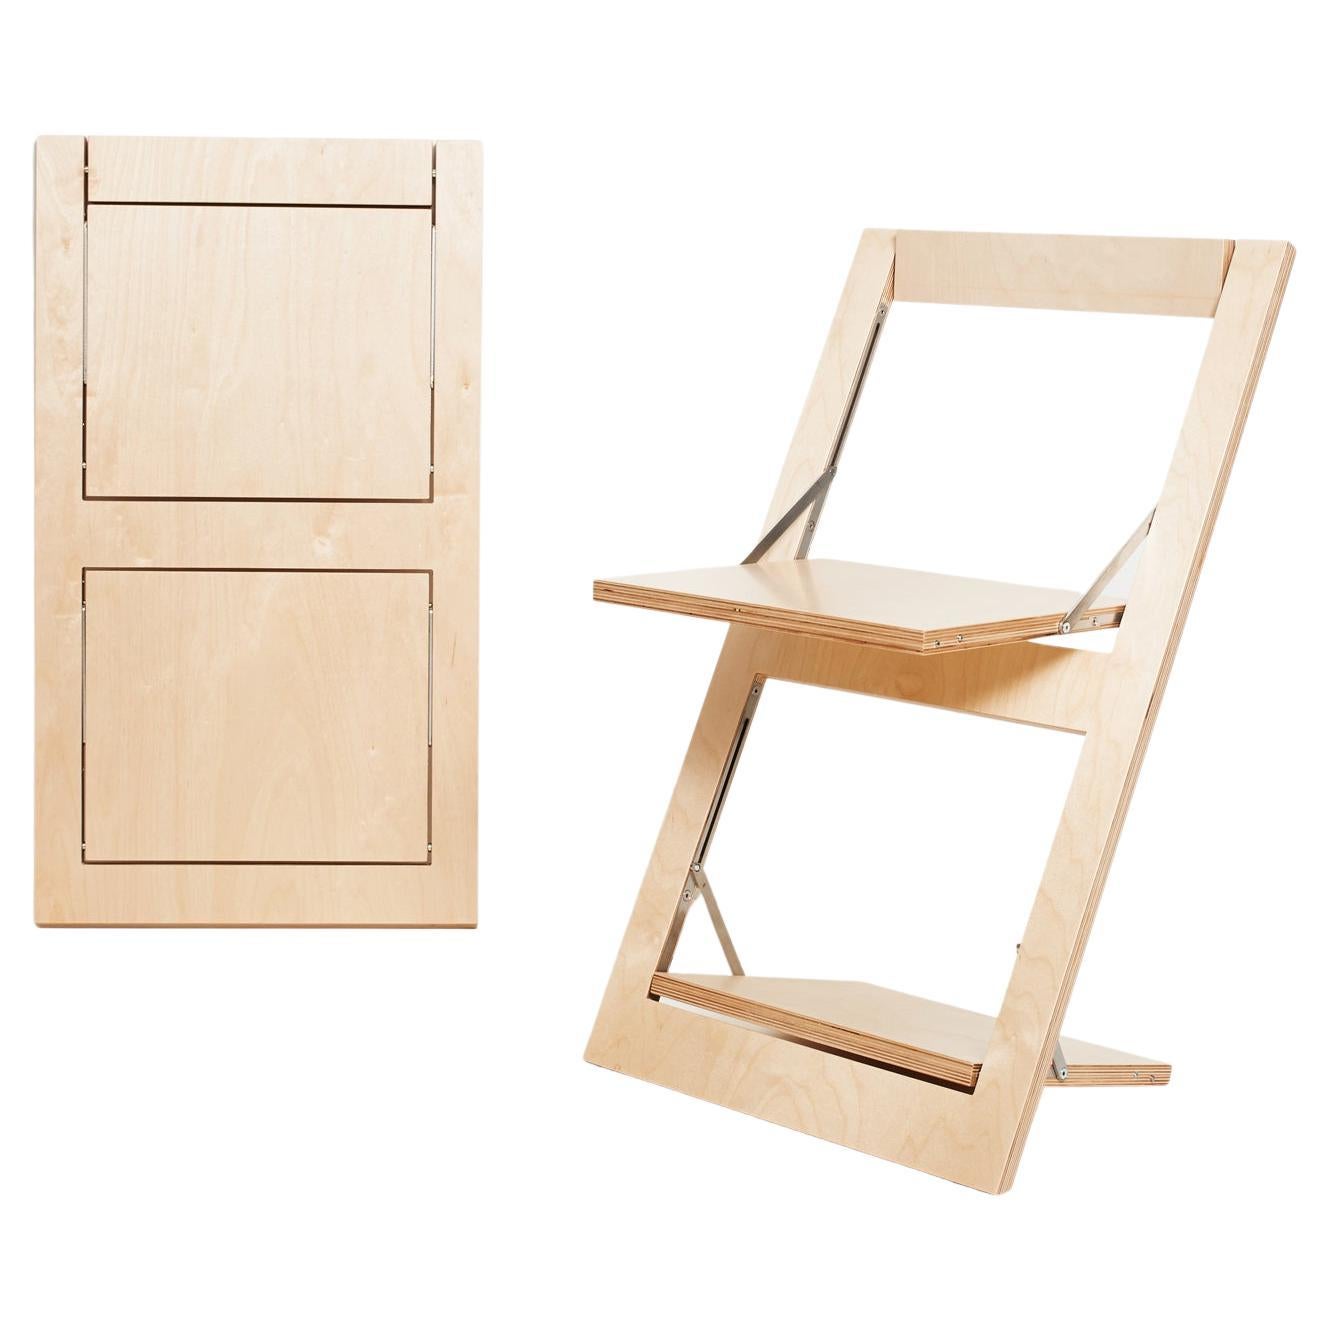 Fläpps Folding Chair, Birch Clear Lacquered For Sale